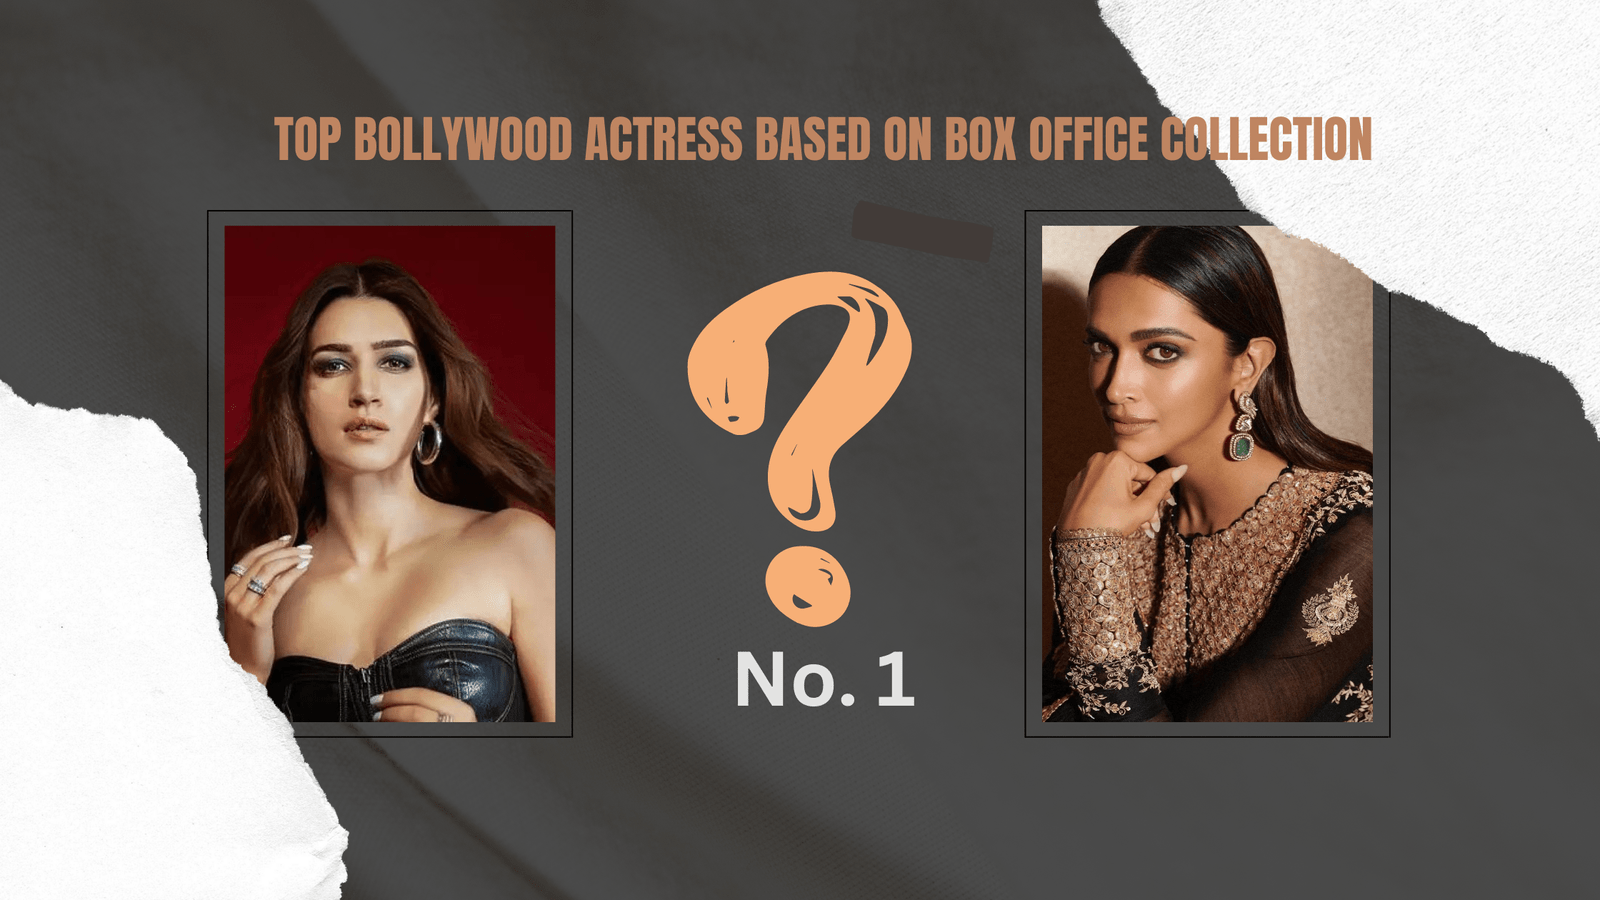 Actress Rank in Bollywood Based on Box Office Collection